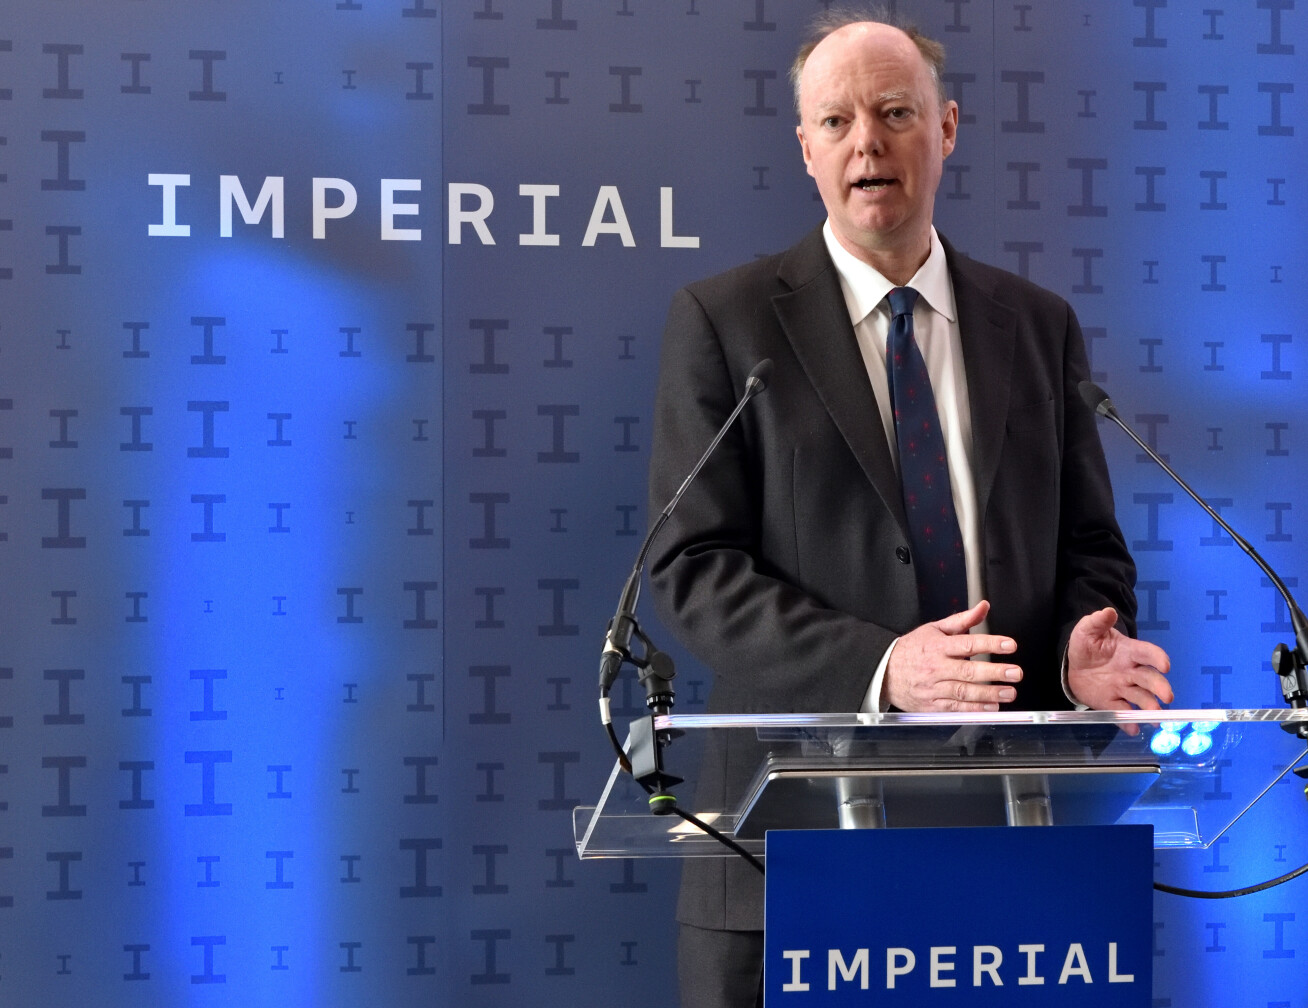 Photo: Chris Whitty, a white man in his 50s, speaks from a podium in front of a backdrop saying 'Imperial' in the university's new branding